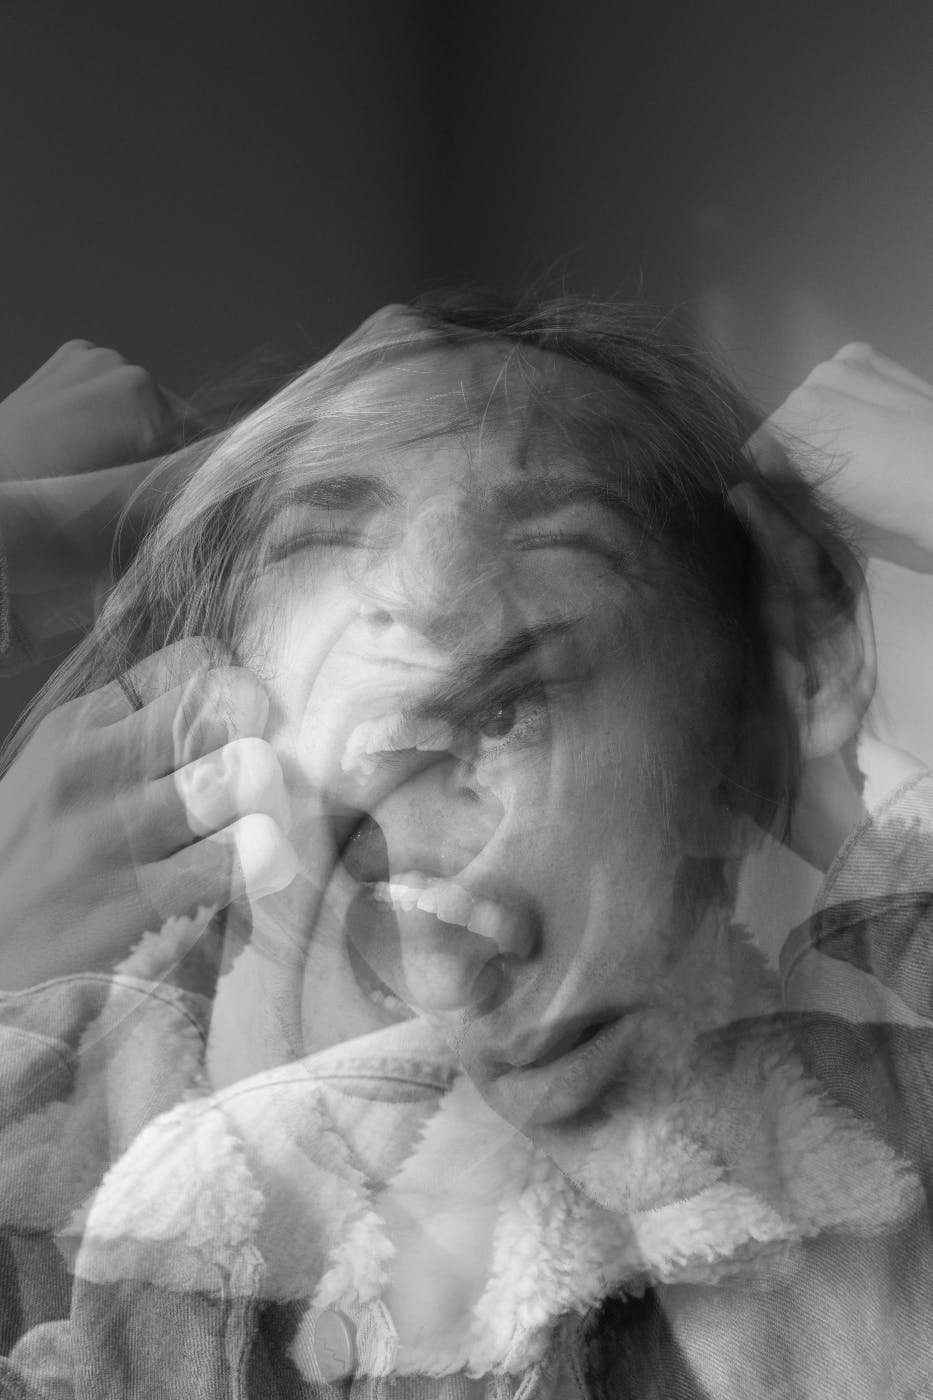 Overlapping images of a woman going through several emotions